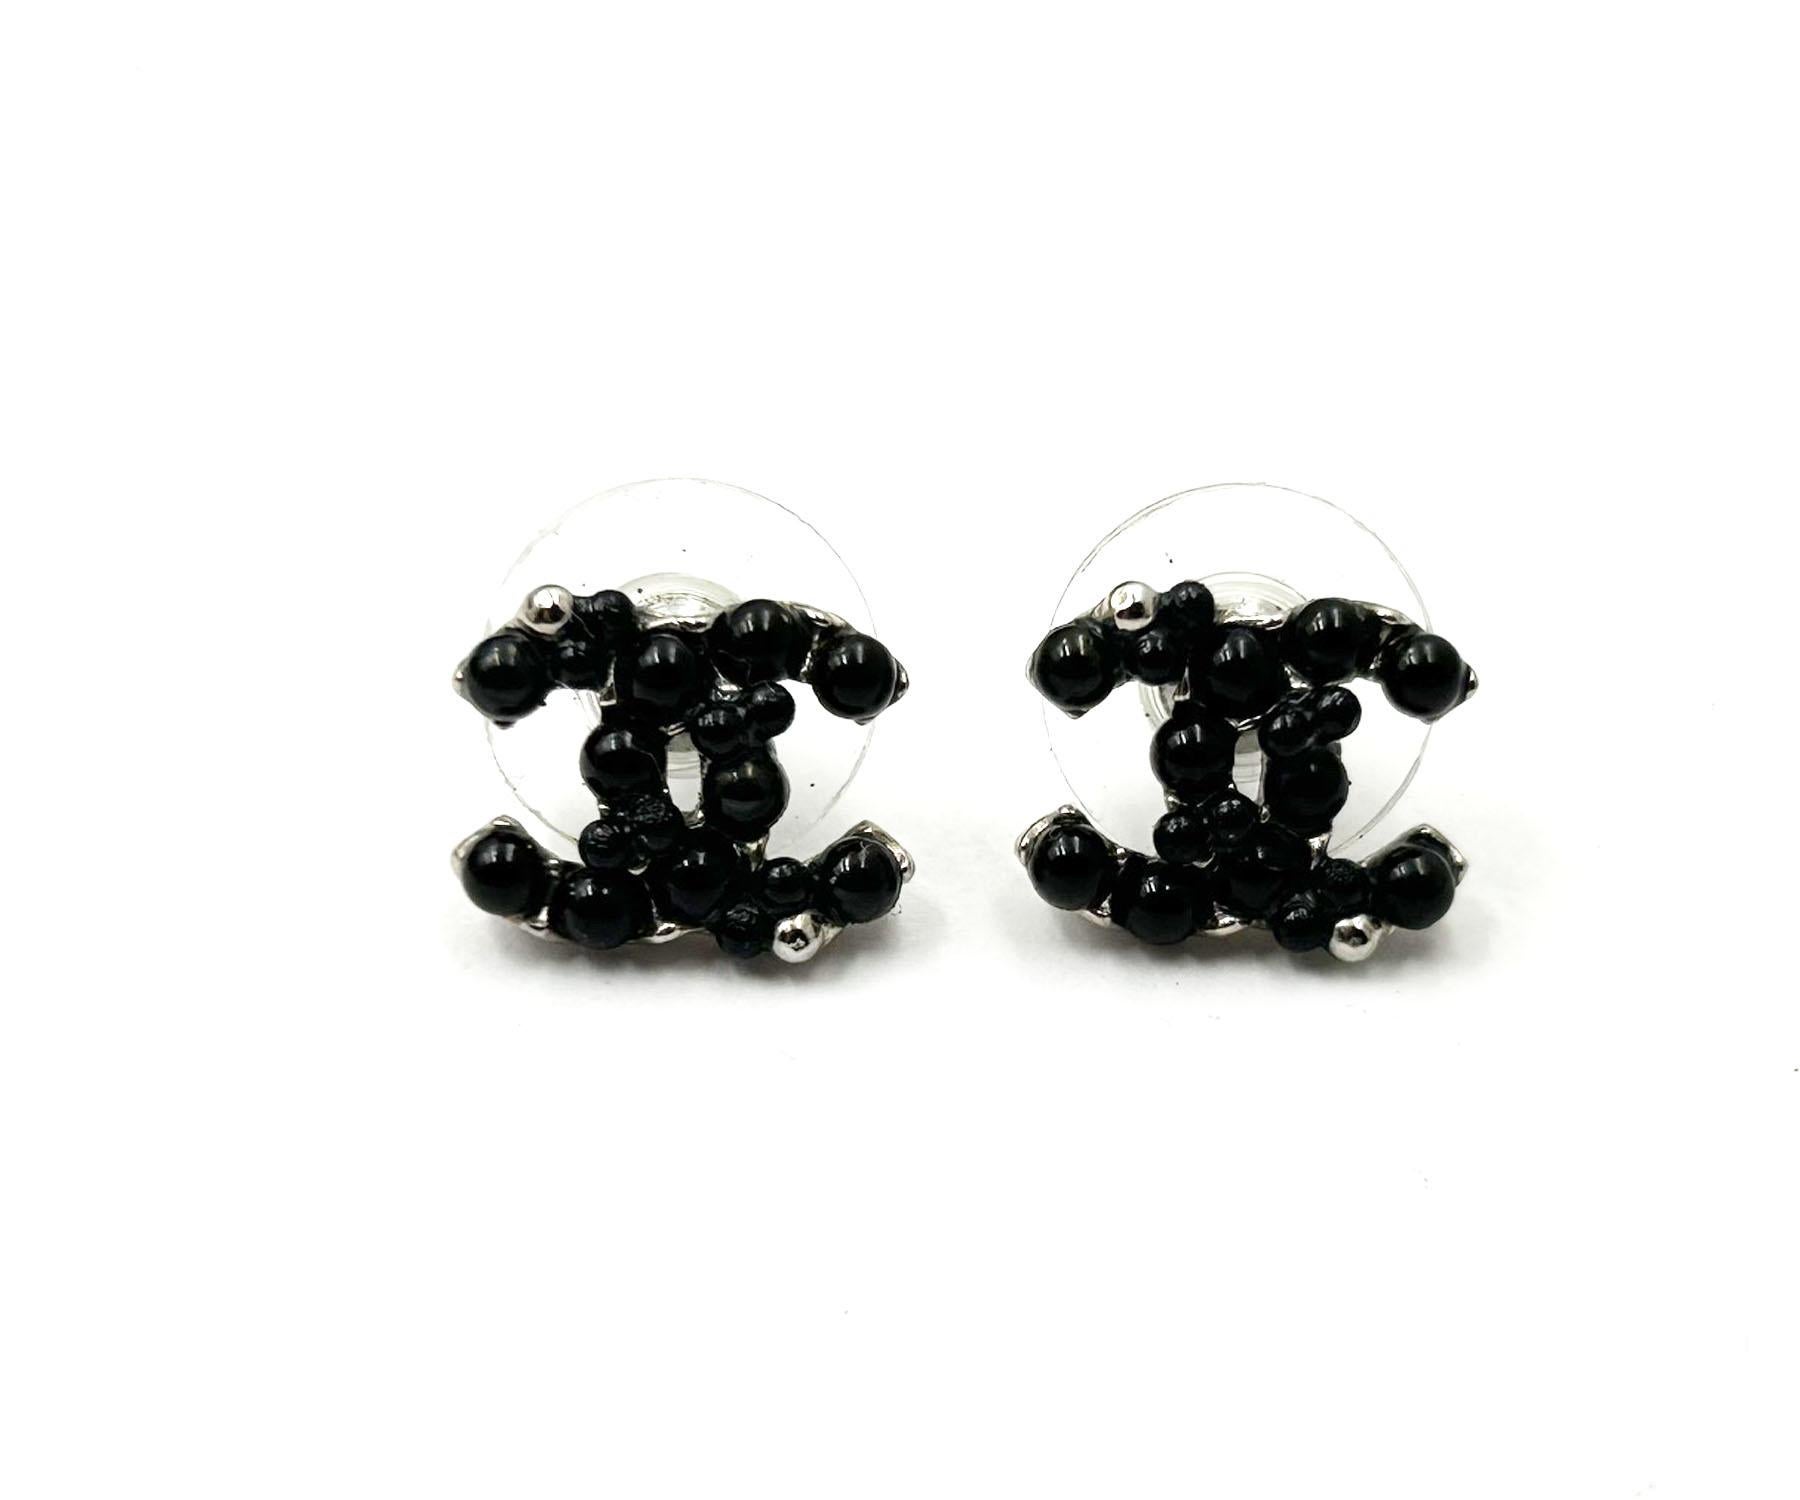 Chanel Silver CC Black Bead Stud Piercing Earrings

* Marked 14
* Made in France
*Comes with original pouch and box

-It is approximately 0.5